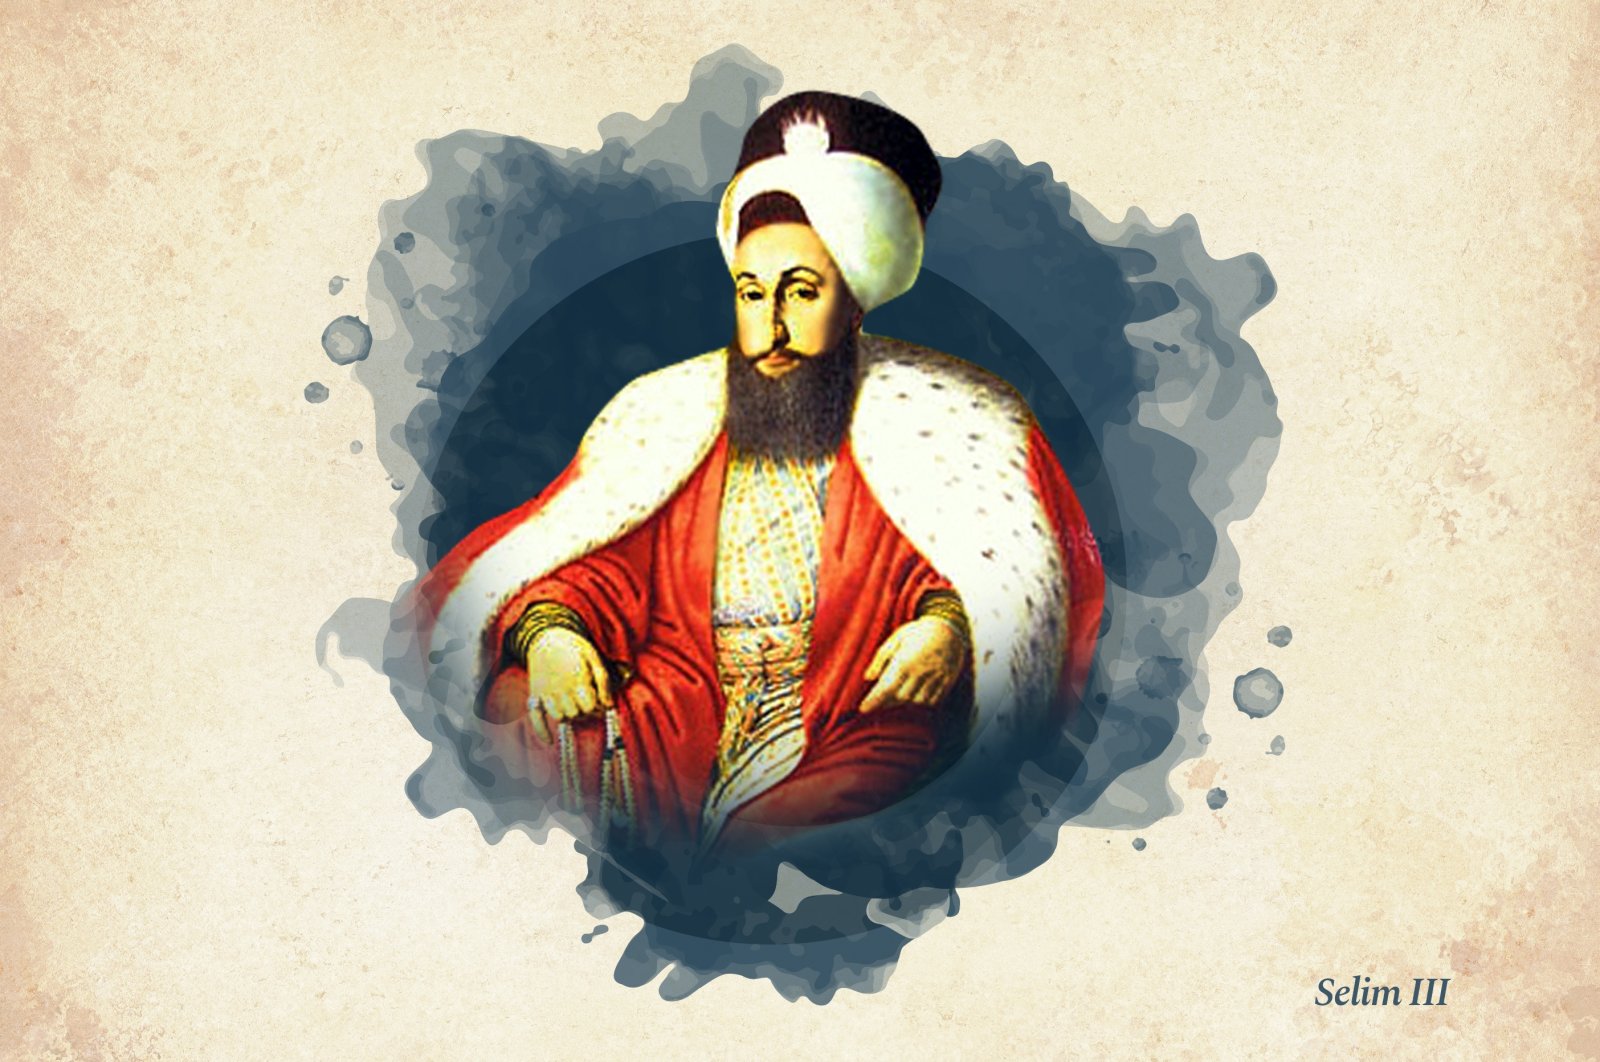 This widely used illustration shows Sultan Selim III, the 28th ruler of the Ottoman Empire. (Wikimedia) 